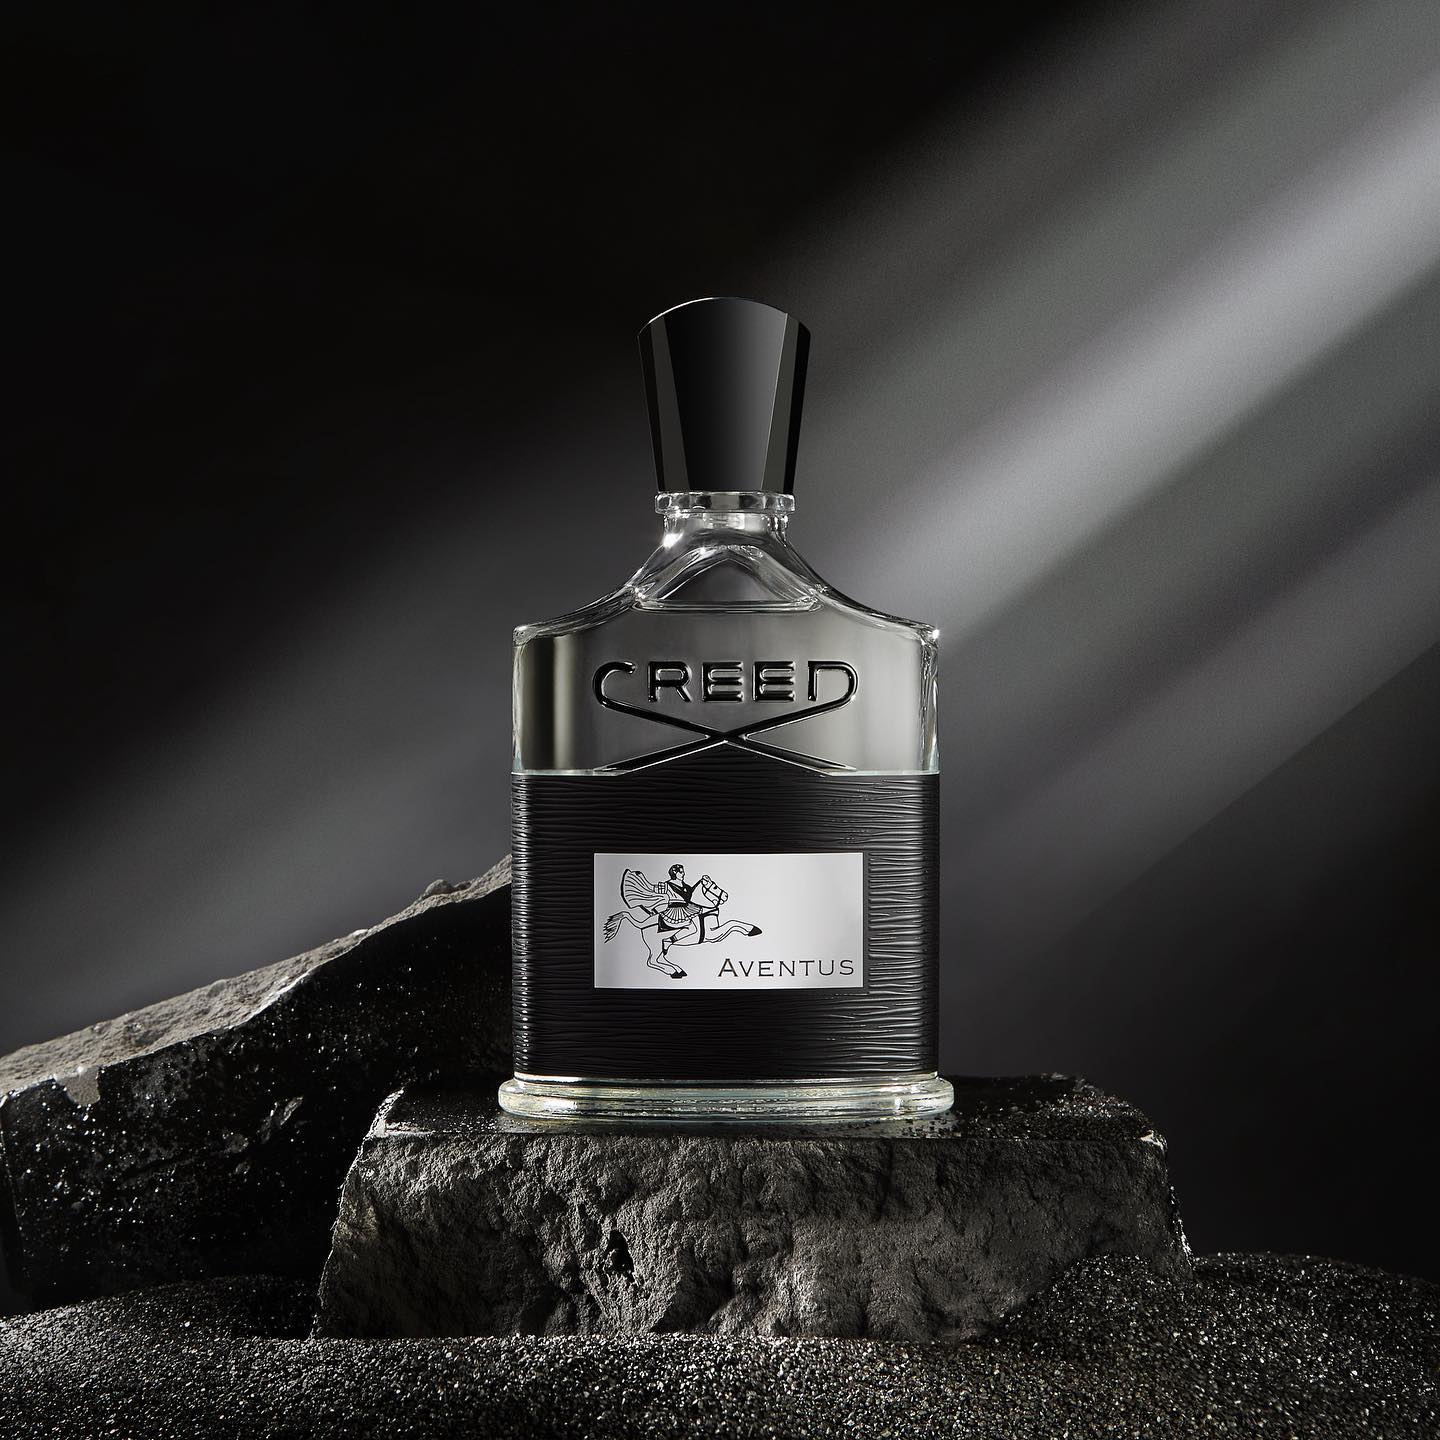 A bottle of Creed Aventus